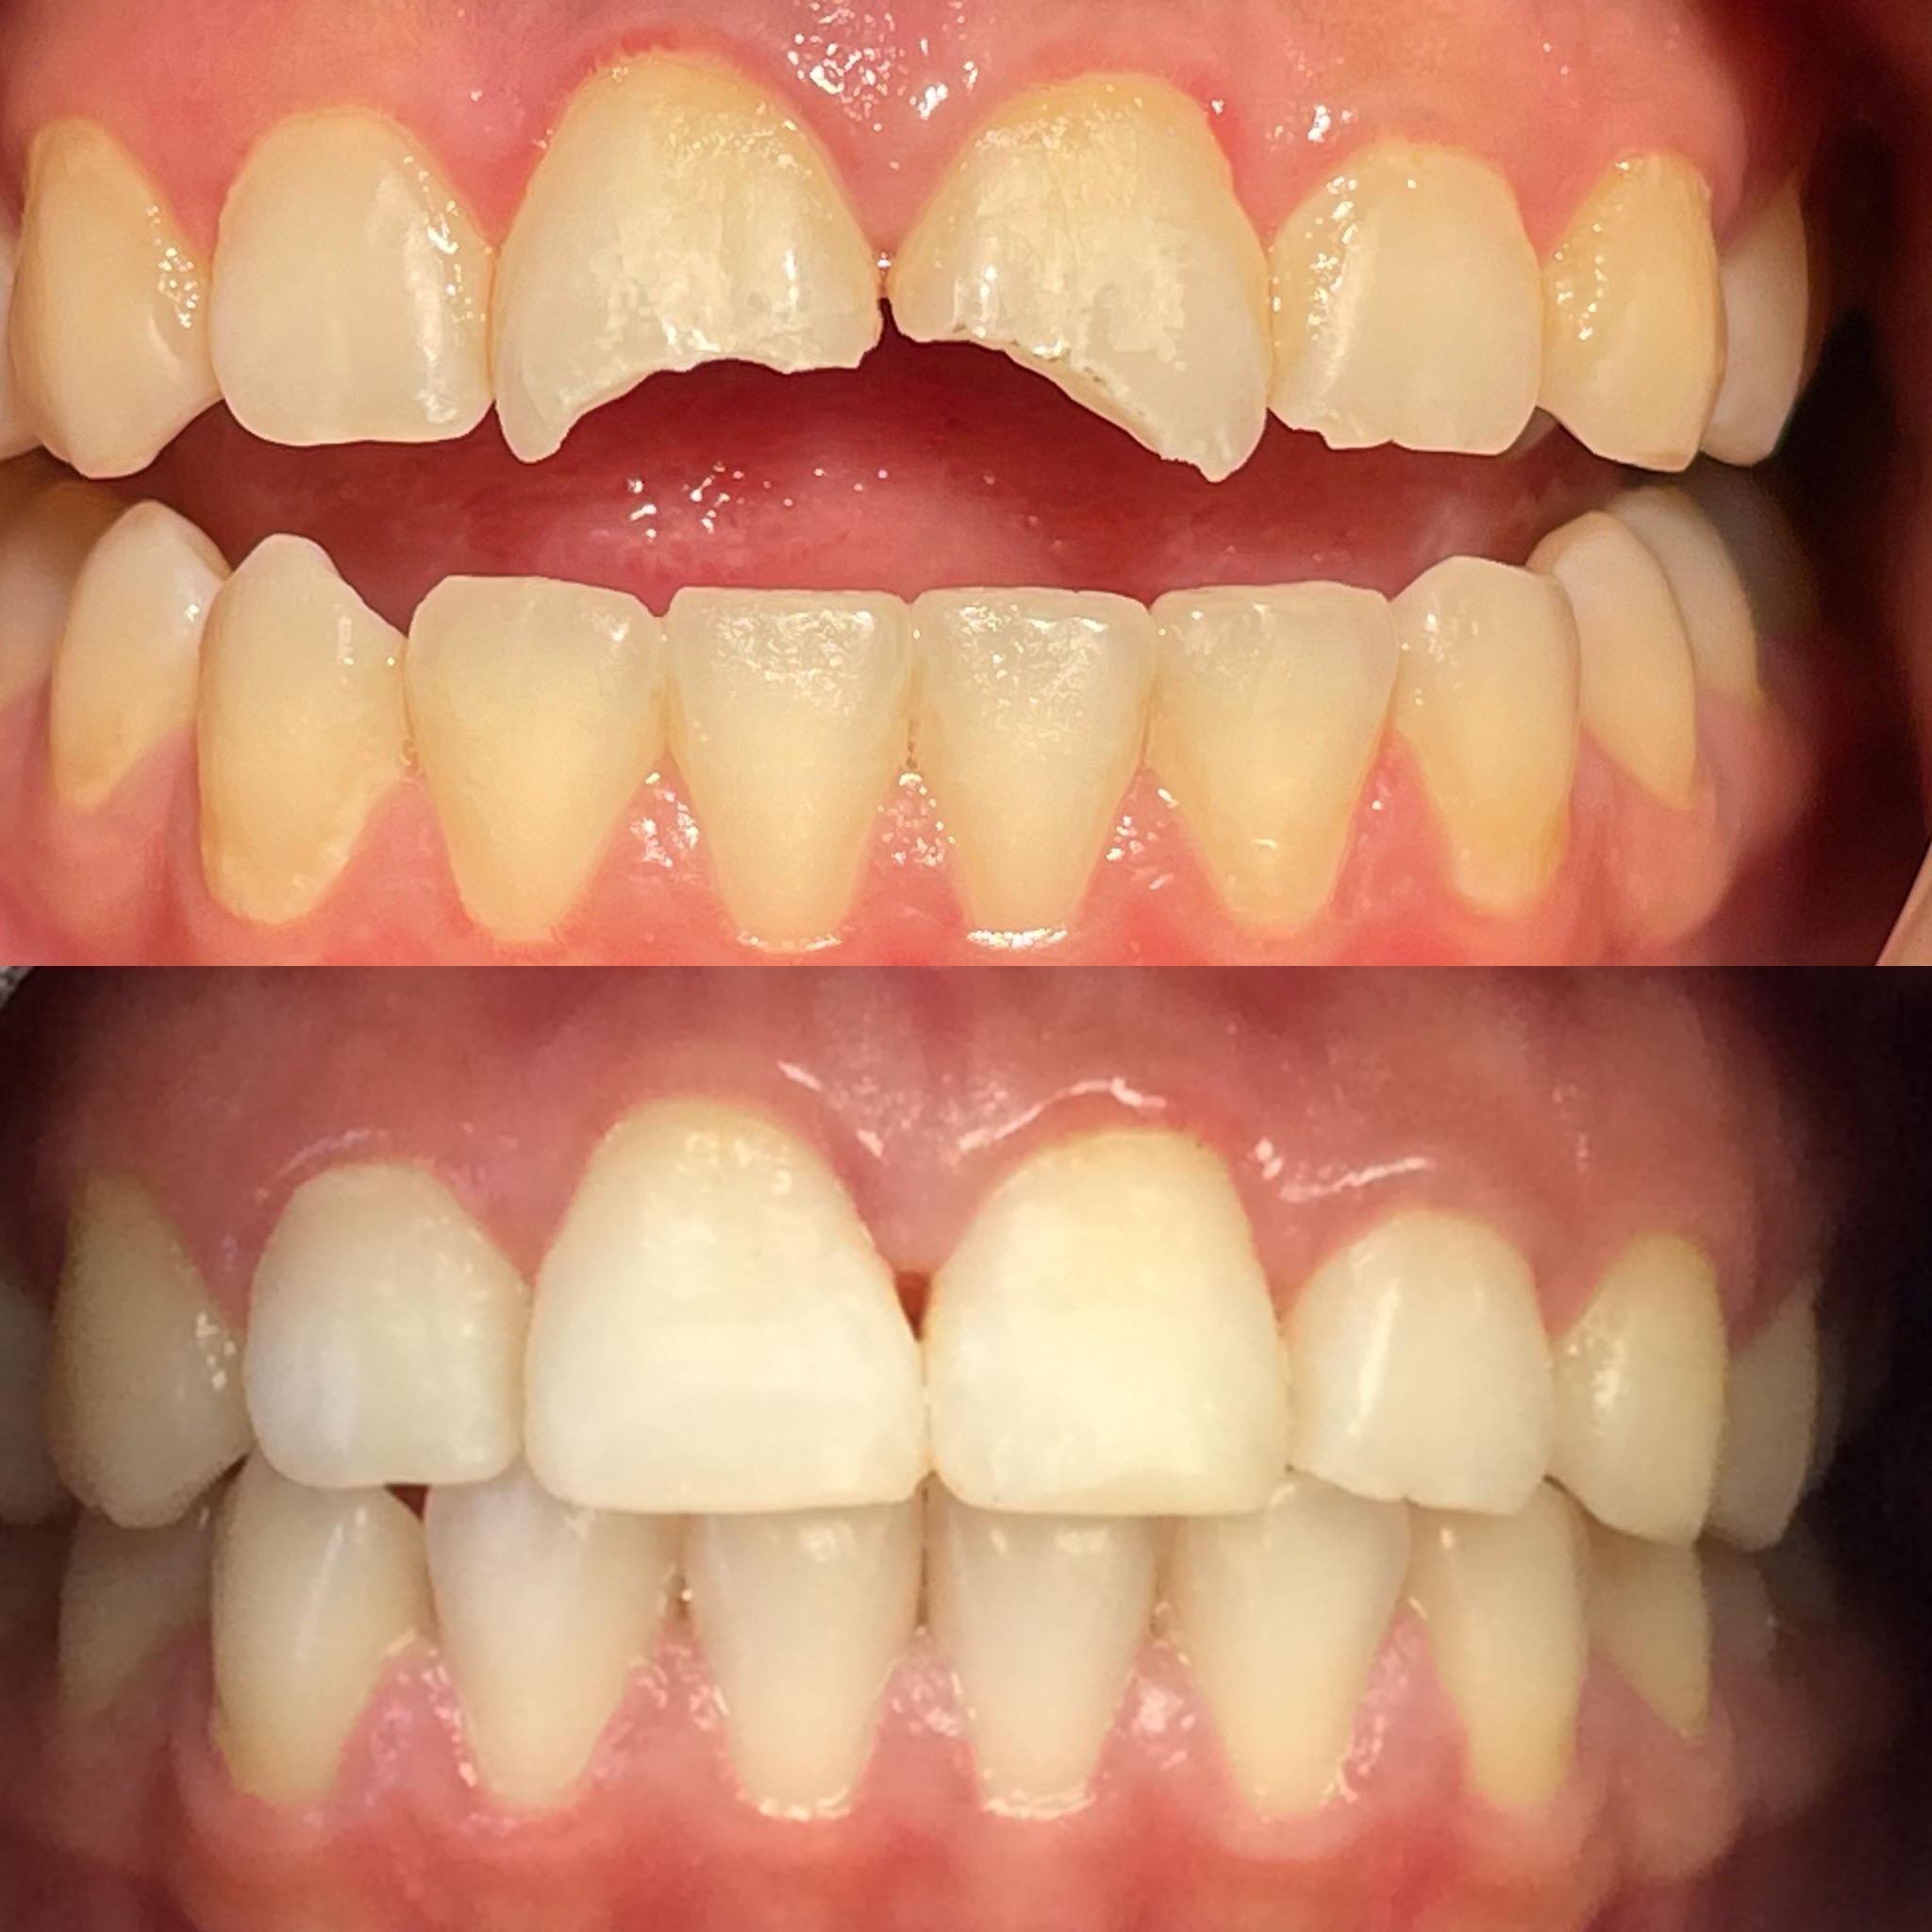 Give Dental Composite filling for chipped teeth (add same day emergency treatment)